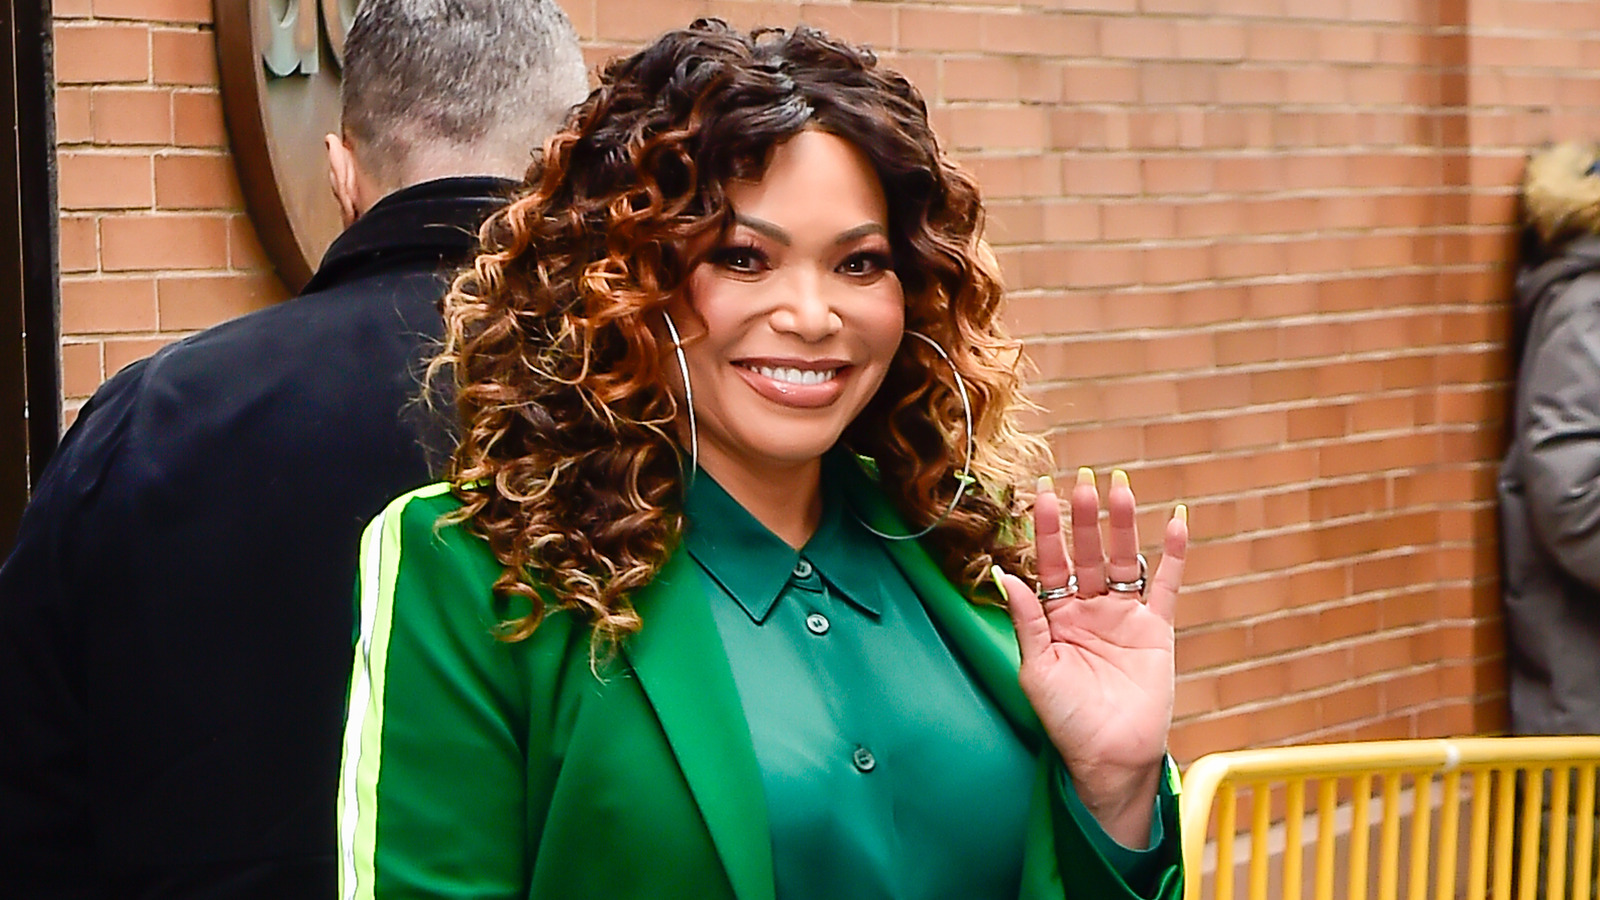 How Tisha Campbell And Her Ex Duane Martin Landed In Legal Trouble